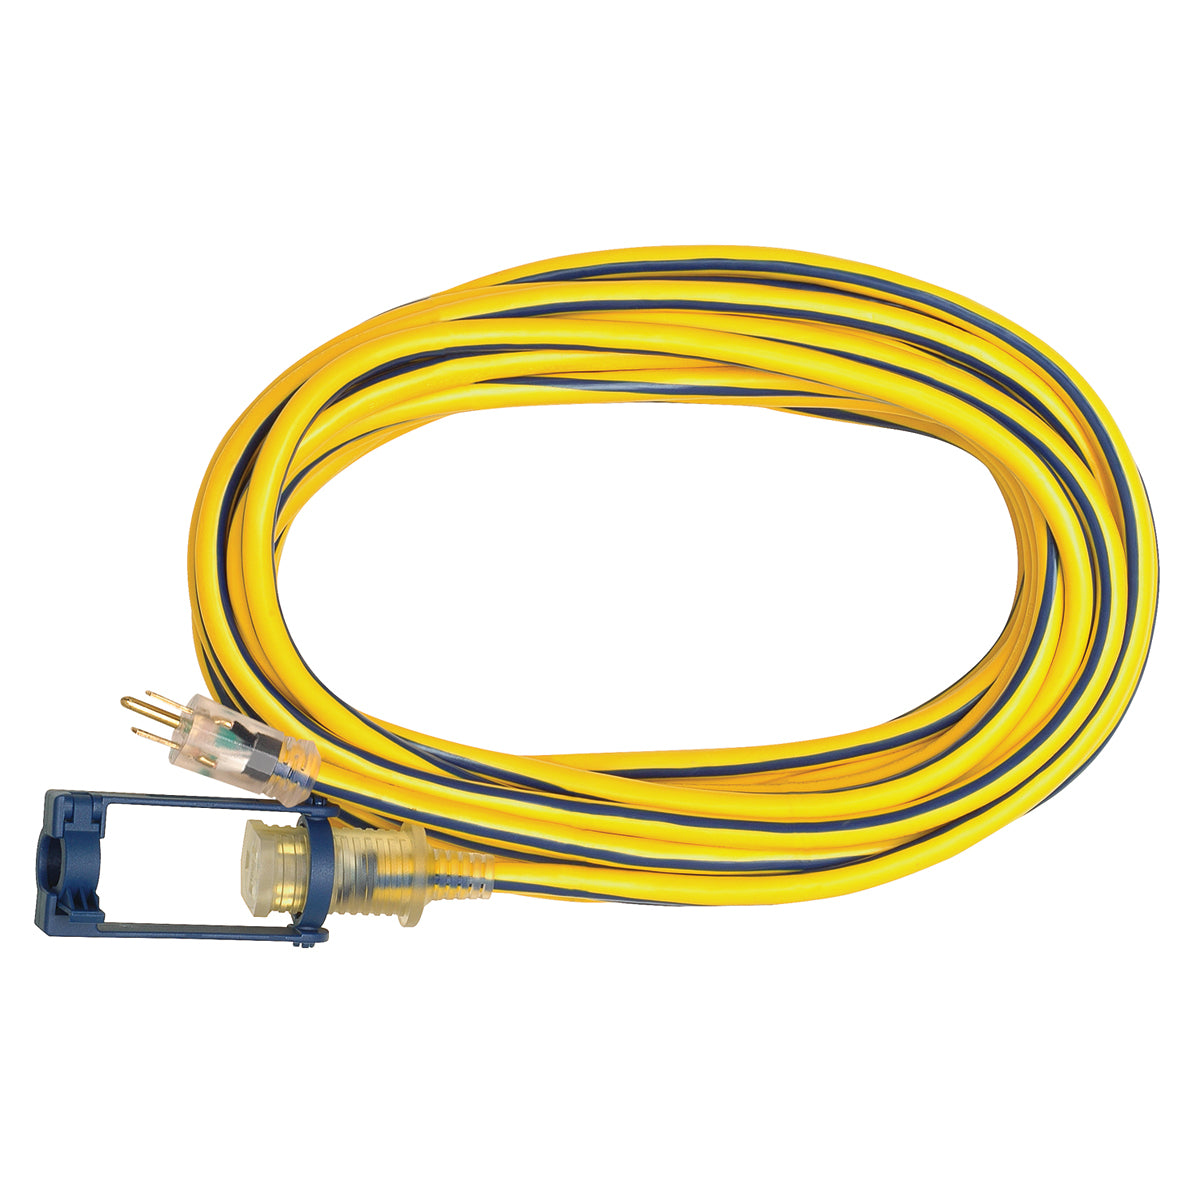 12/3X50' YELLOW/BLUE EXT. CORD, LIGHTED ENDS